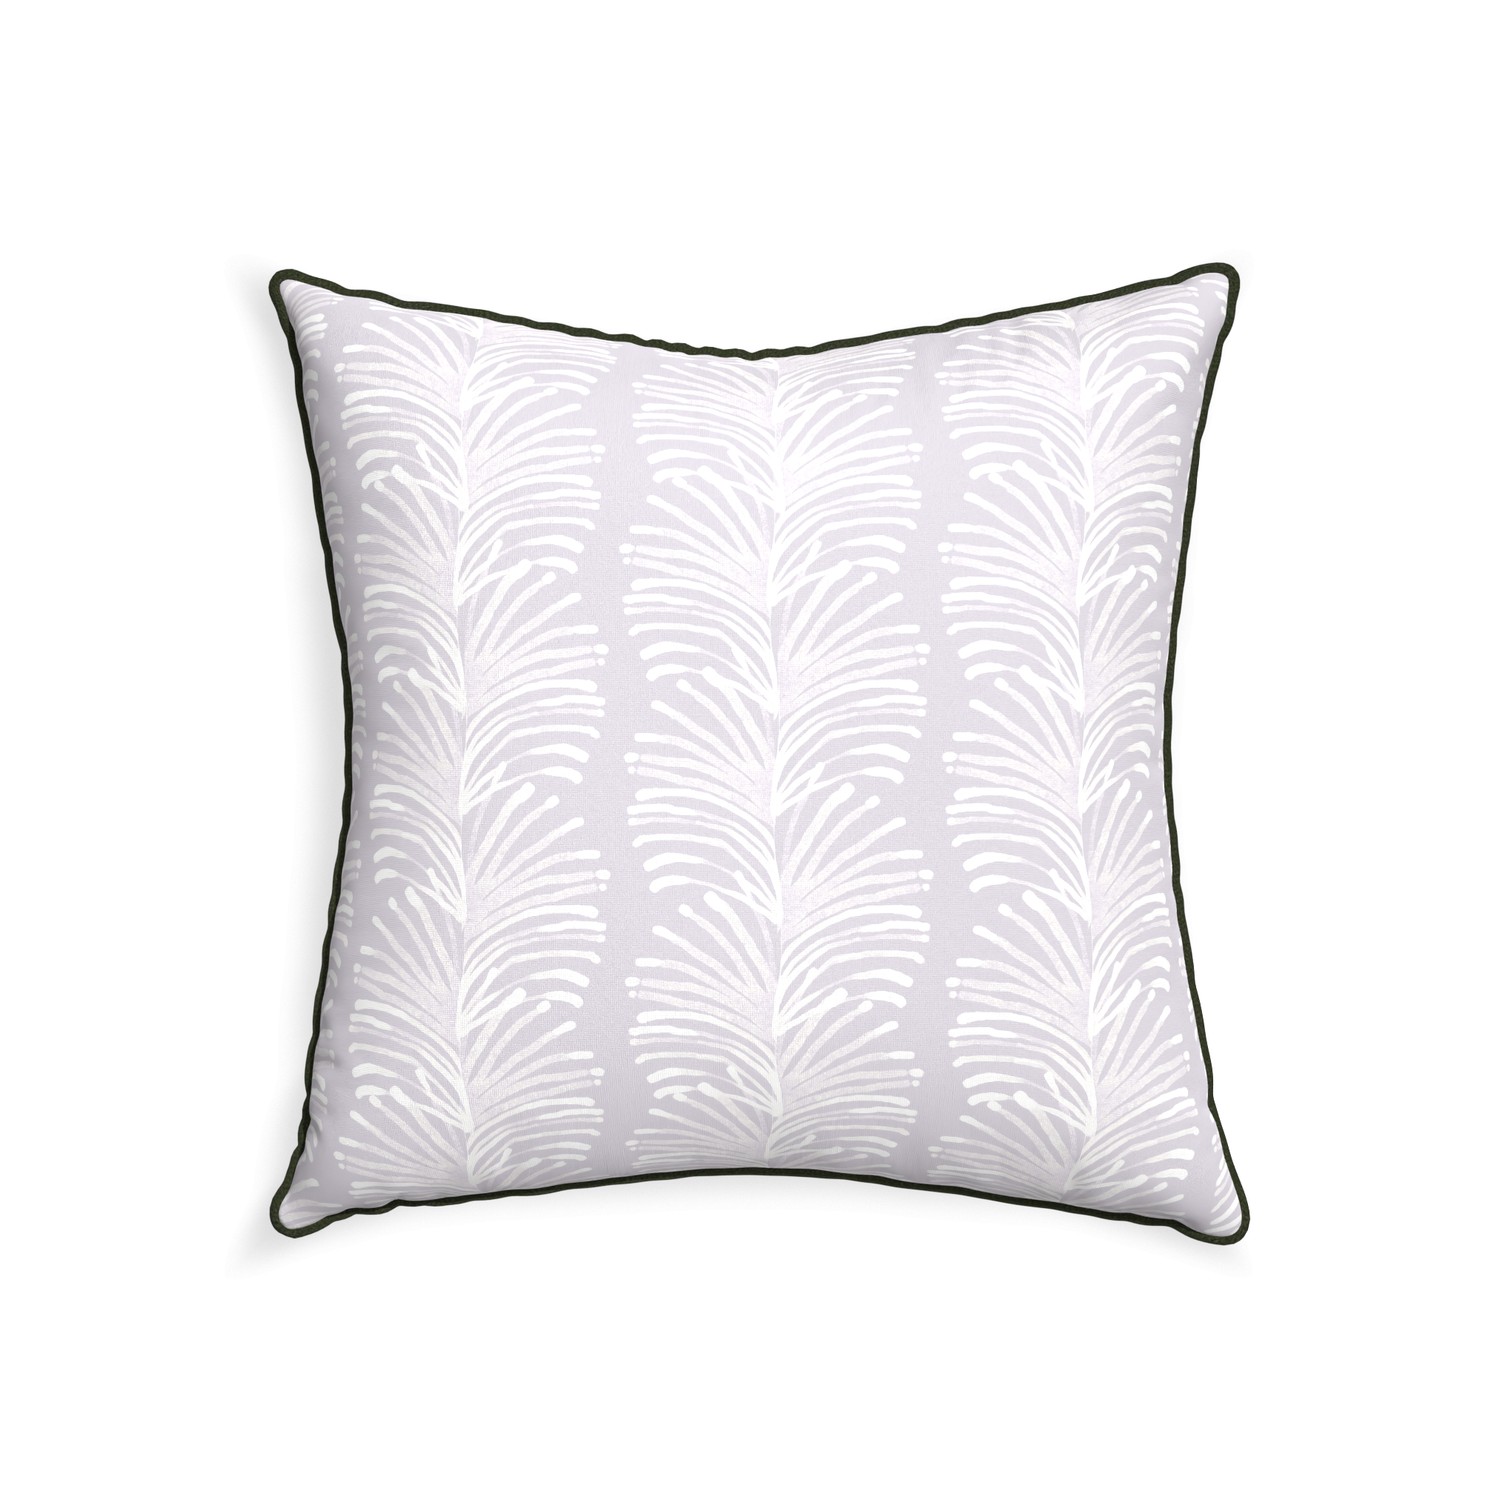 22-square emma lavender custom lavender botanical stripepillow with f piping on white background